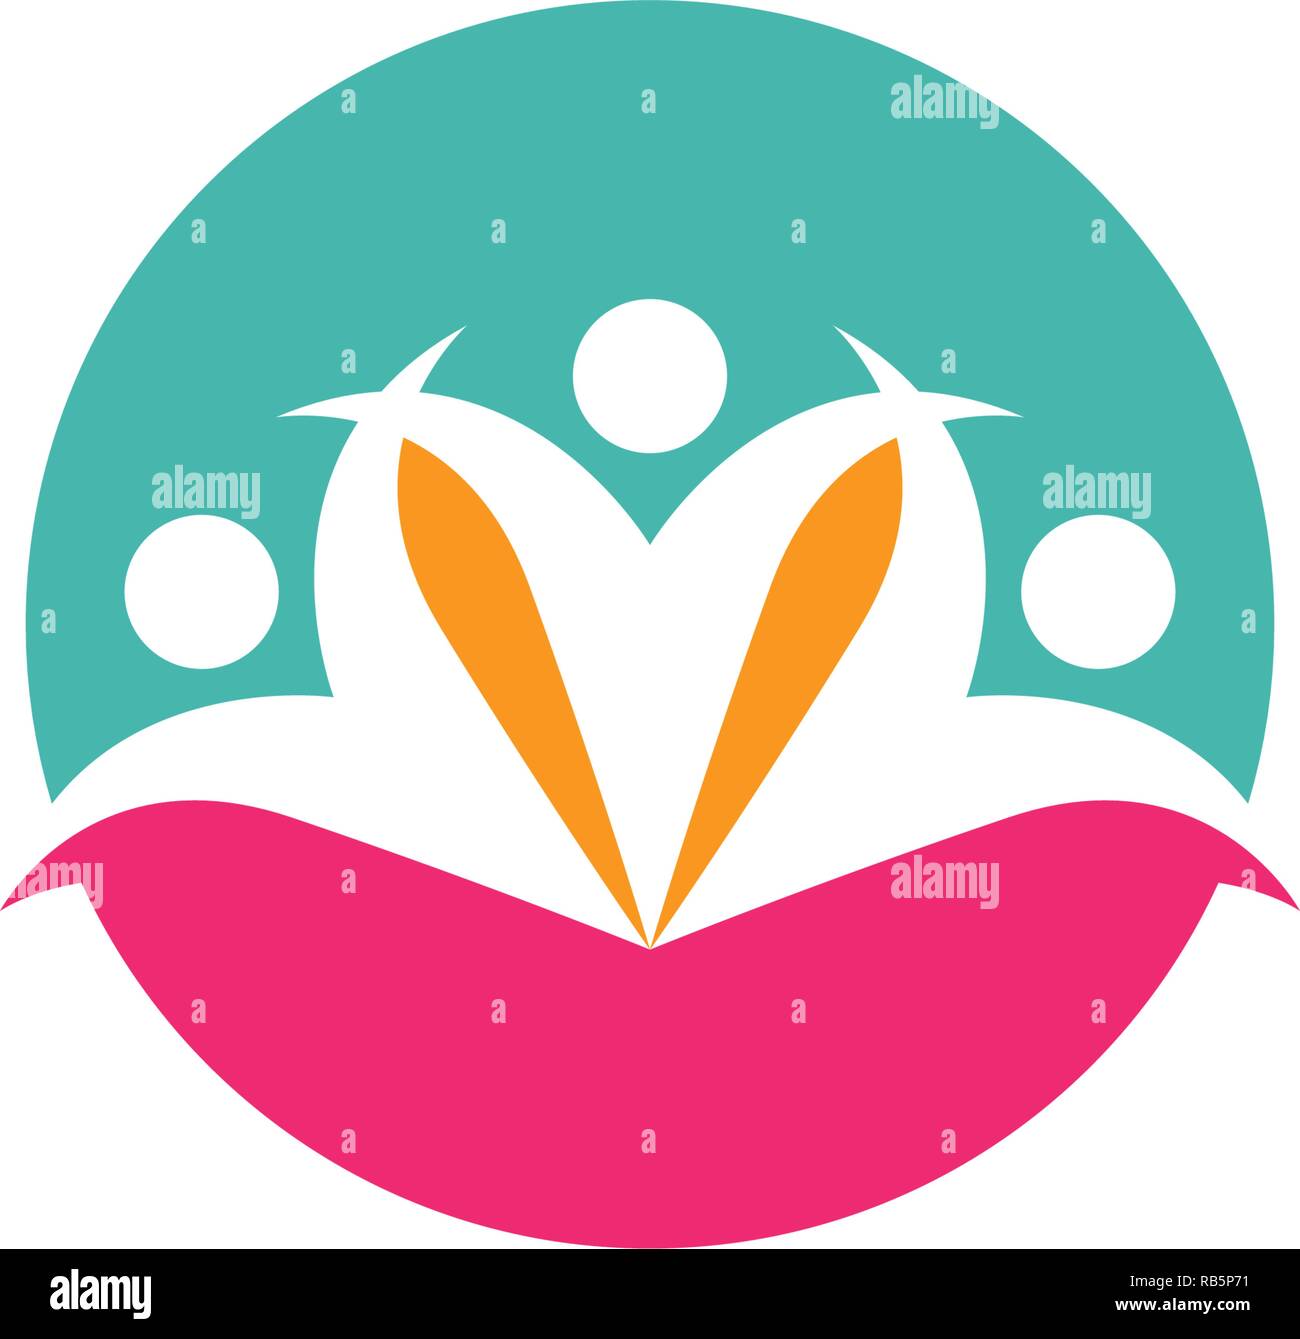 Adoption and community care Logo template vector icons Stock Vector